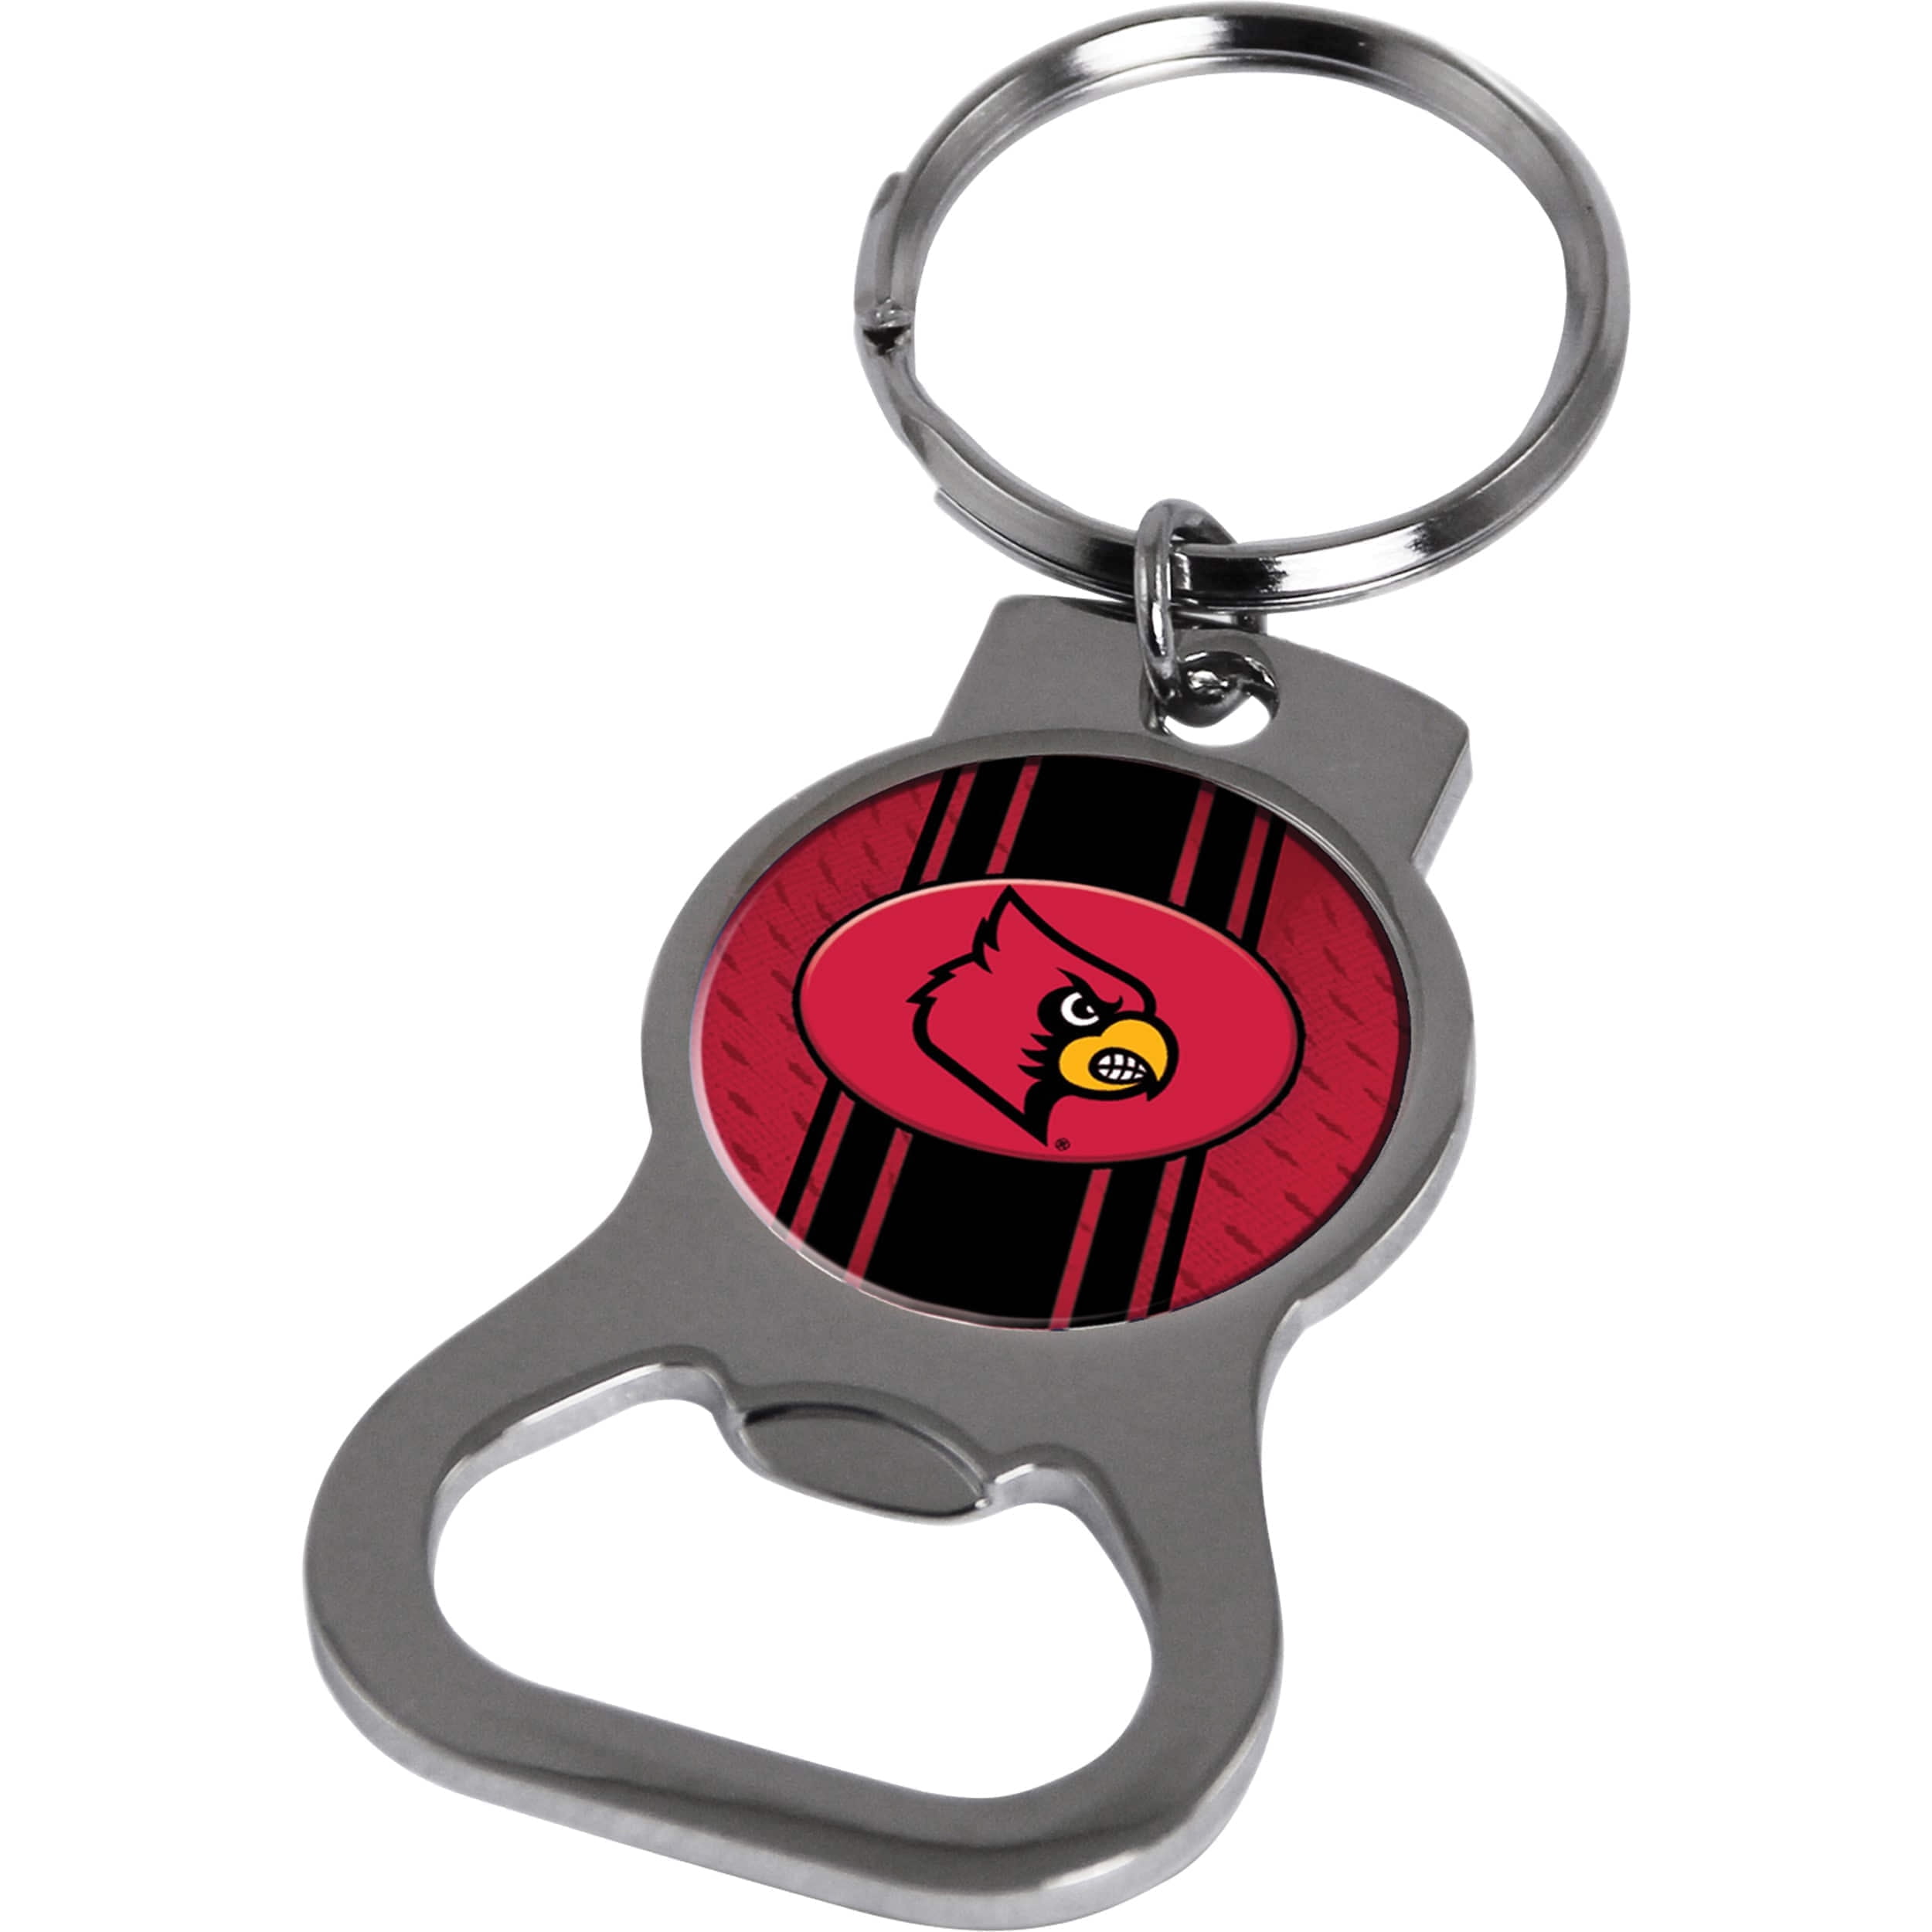 Fashion Ncaa Univ. Of Louisville Bottle Opener Key Ring By Rico Industries  (1.5 X 3.75) Made In China gc6427 